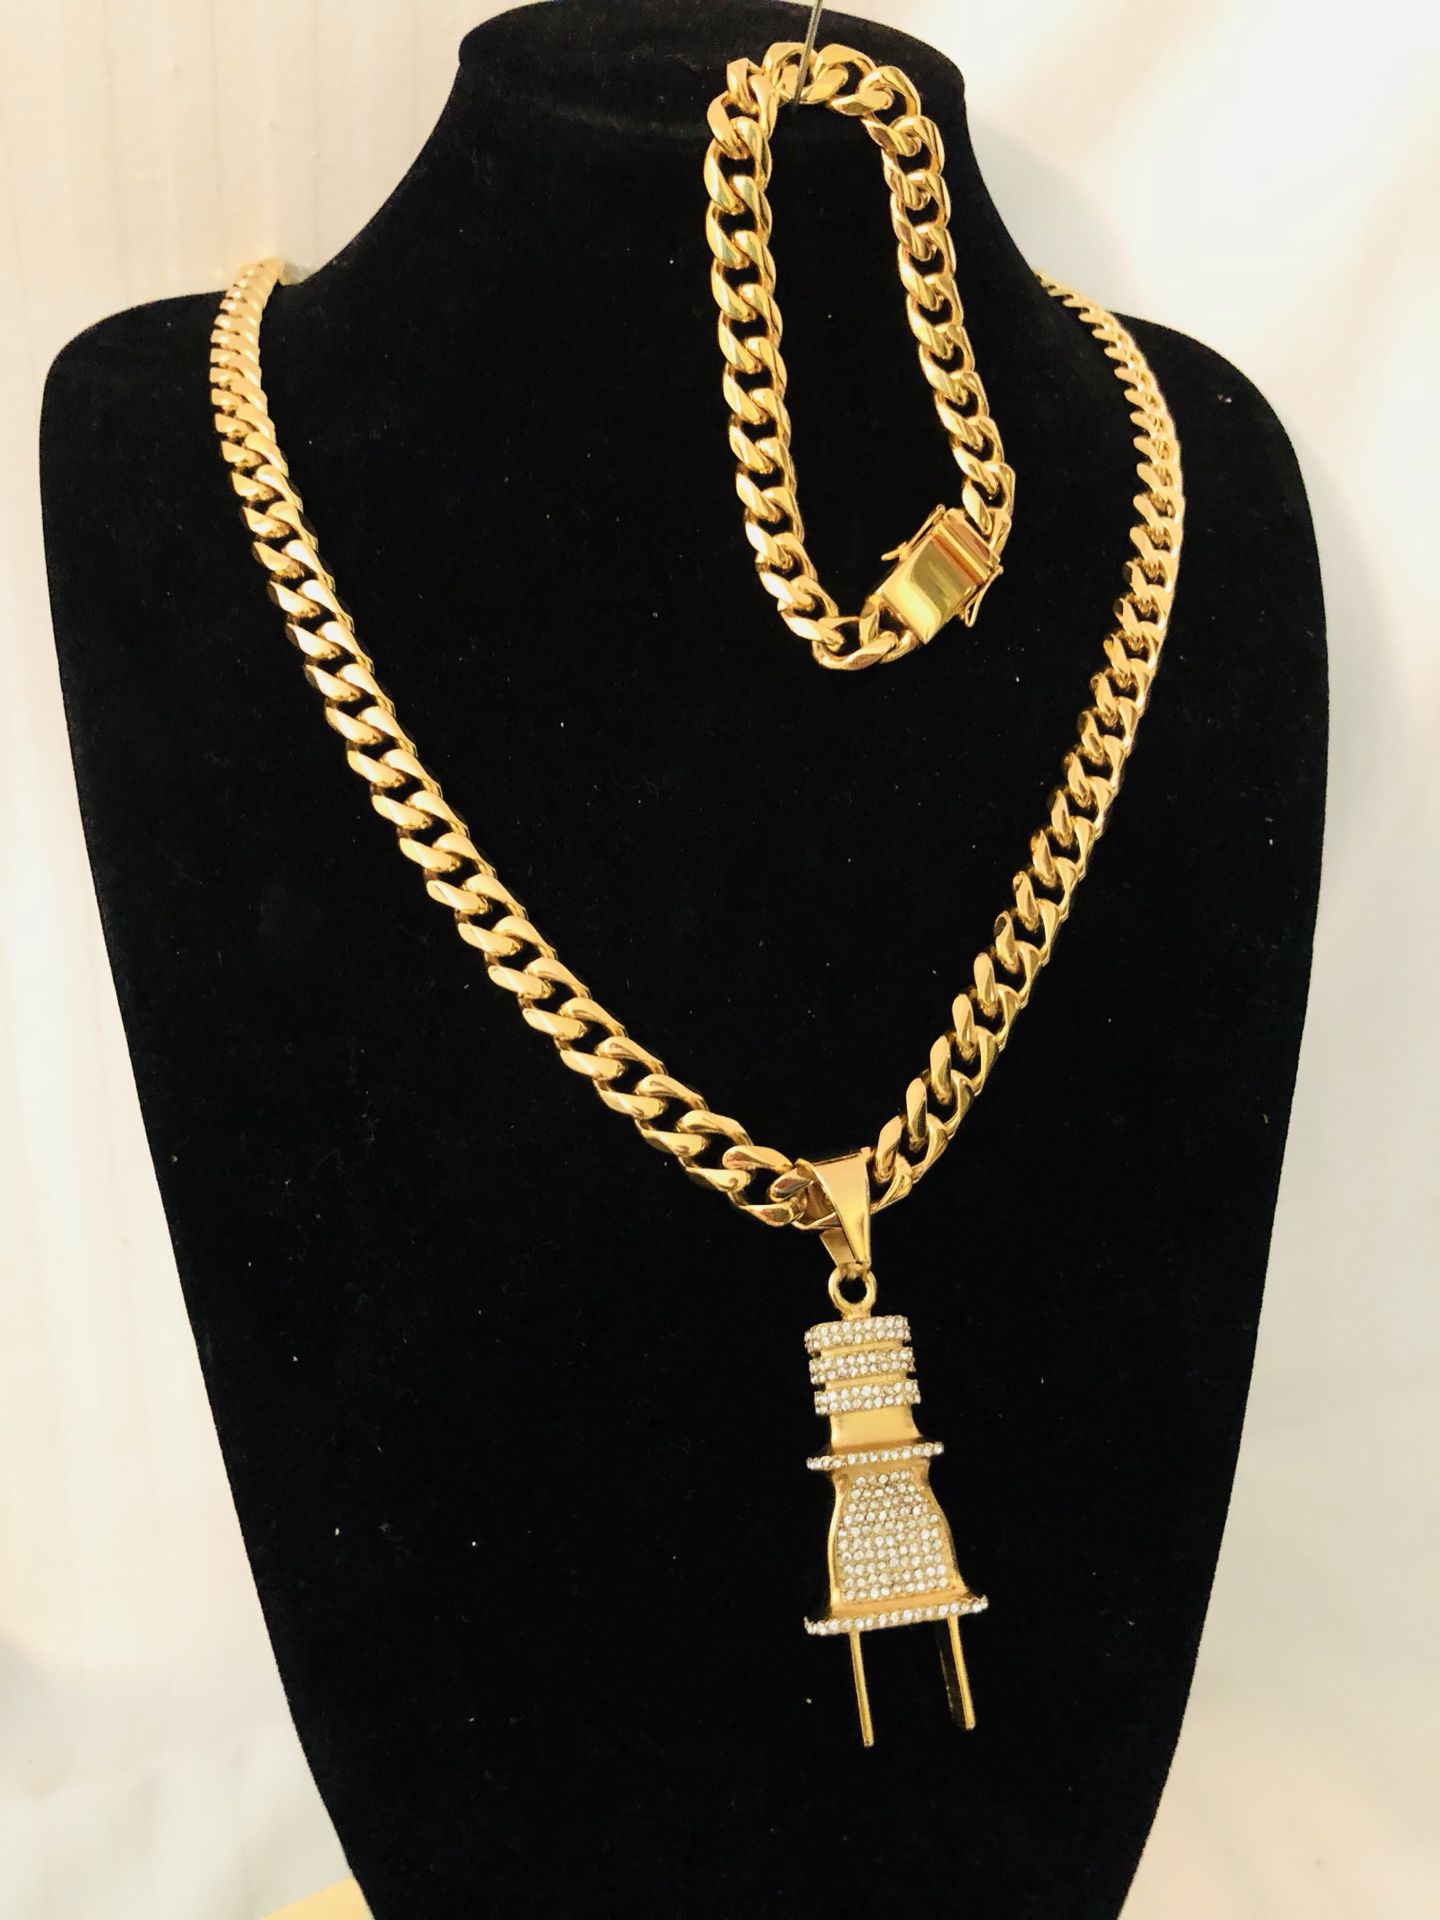 30” Cuban link chain necklace gold stainless steel - plug charm cubic zirconia jewels - 8.5” bracelet